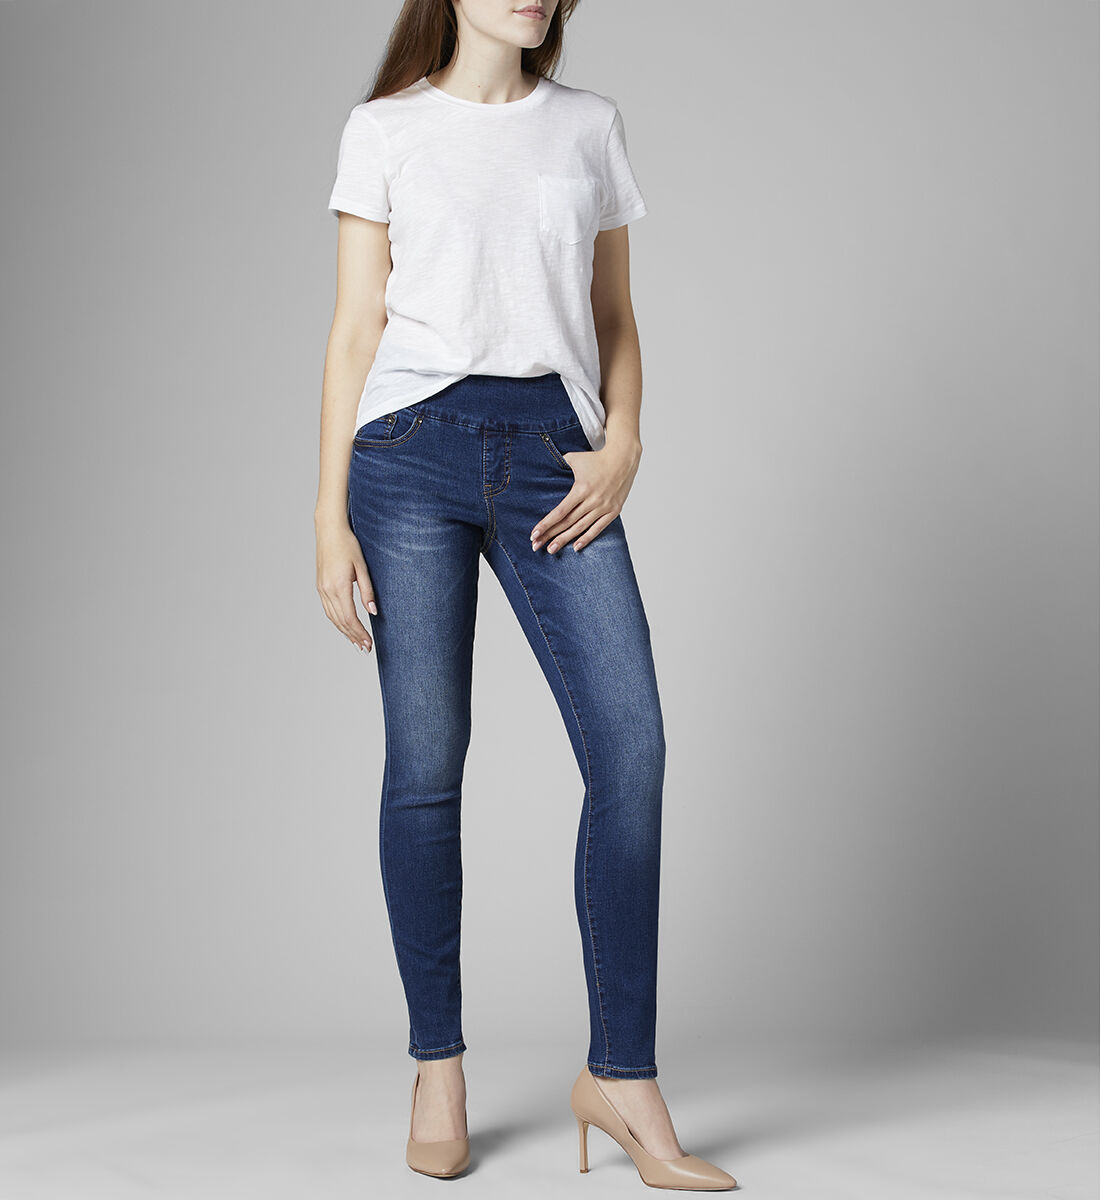 Buy Nora Mid Rise Skinny Pull-On Jeans for USD 41.00 | Jag Jeans 